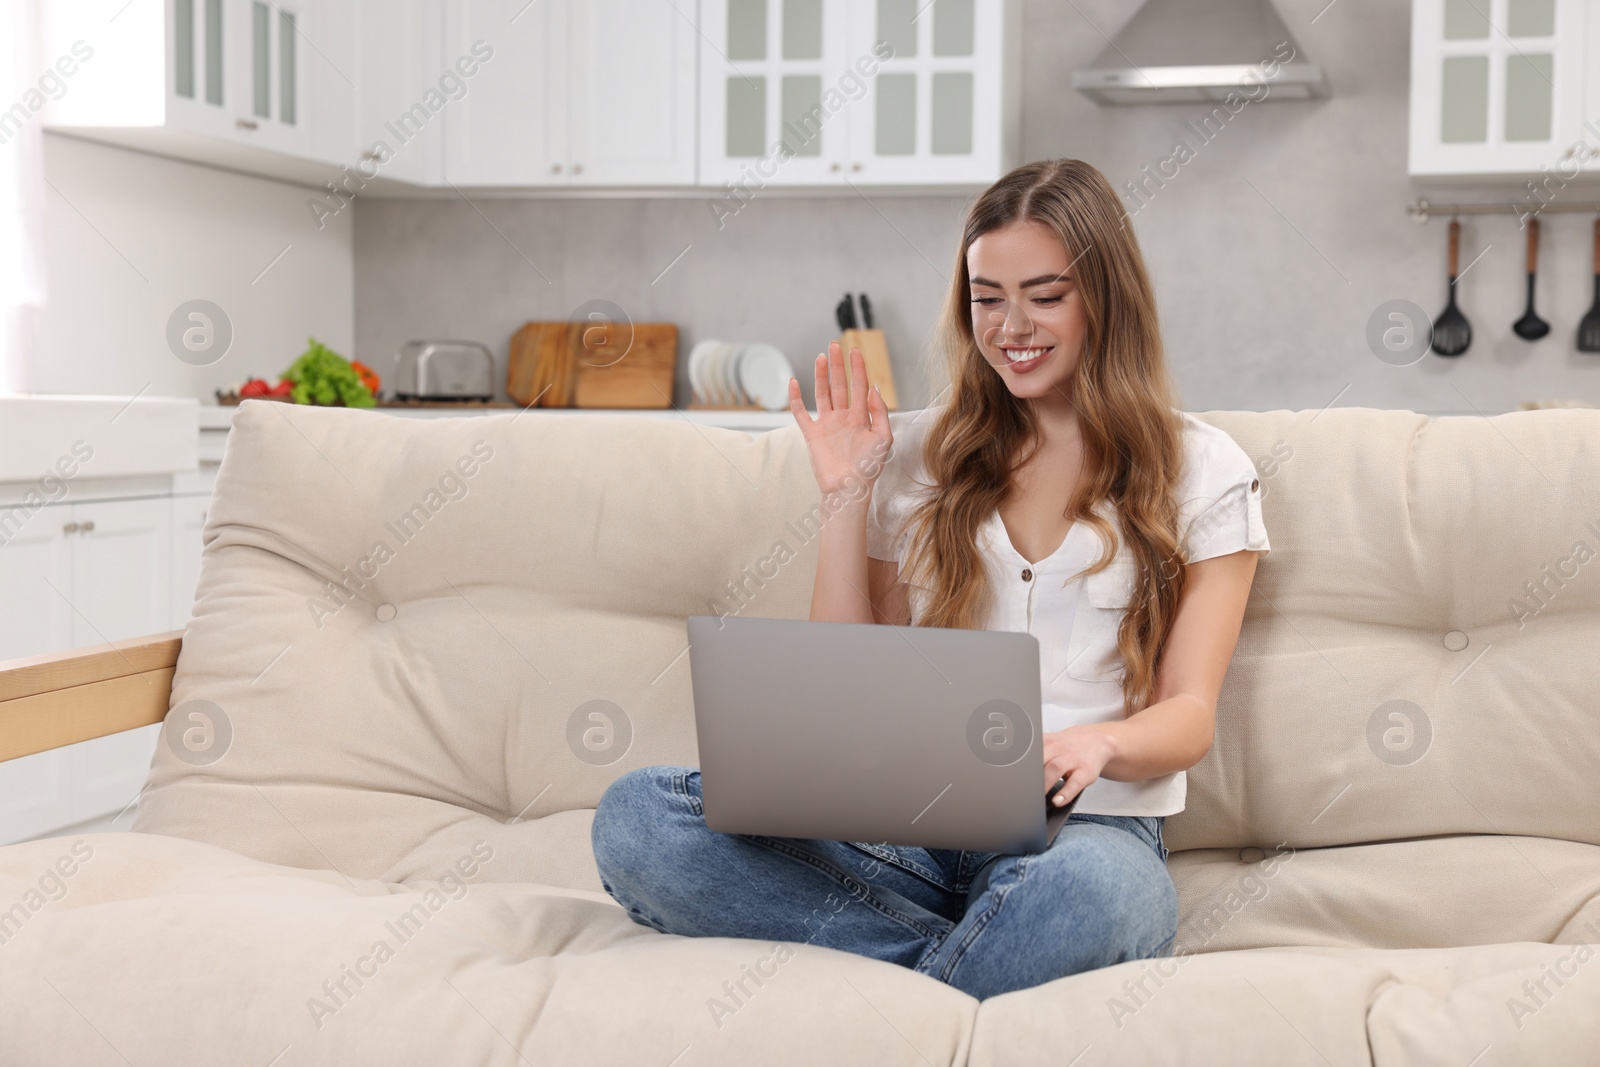 Photo of Happy woman having video chat via laptop on couch in room